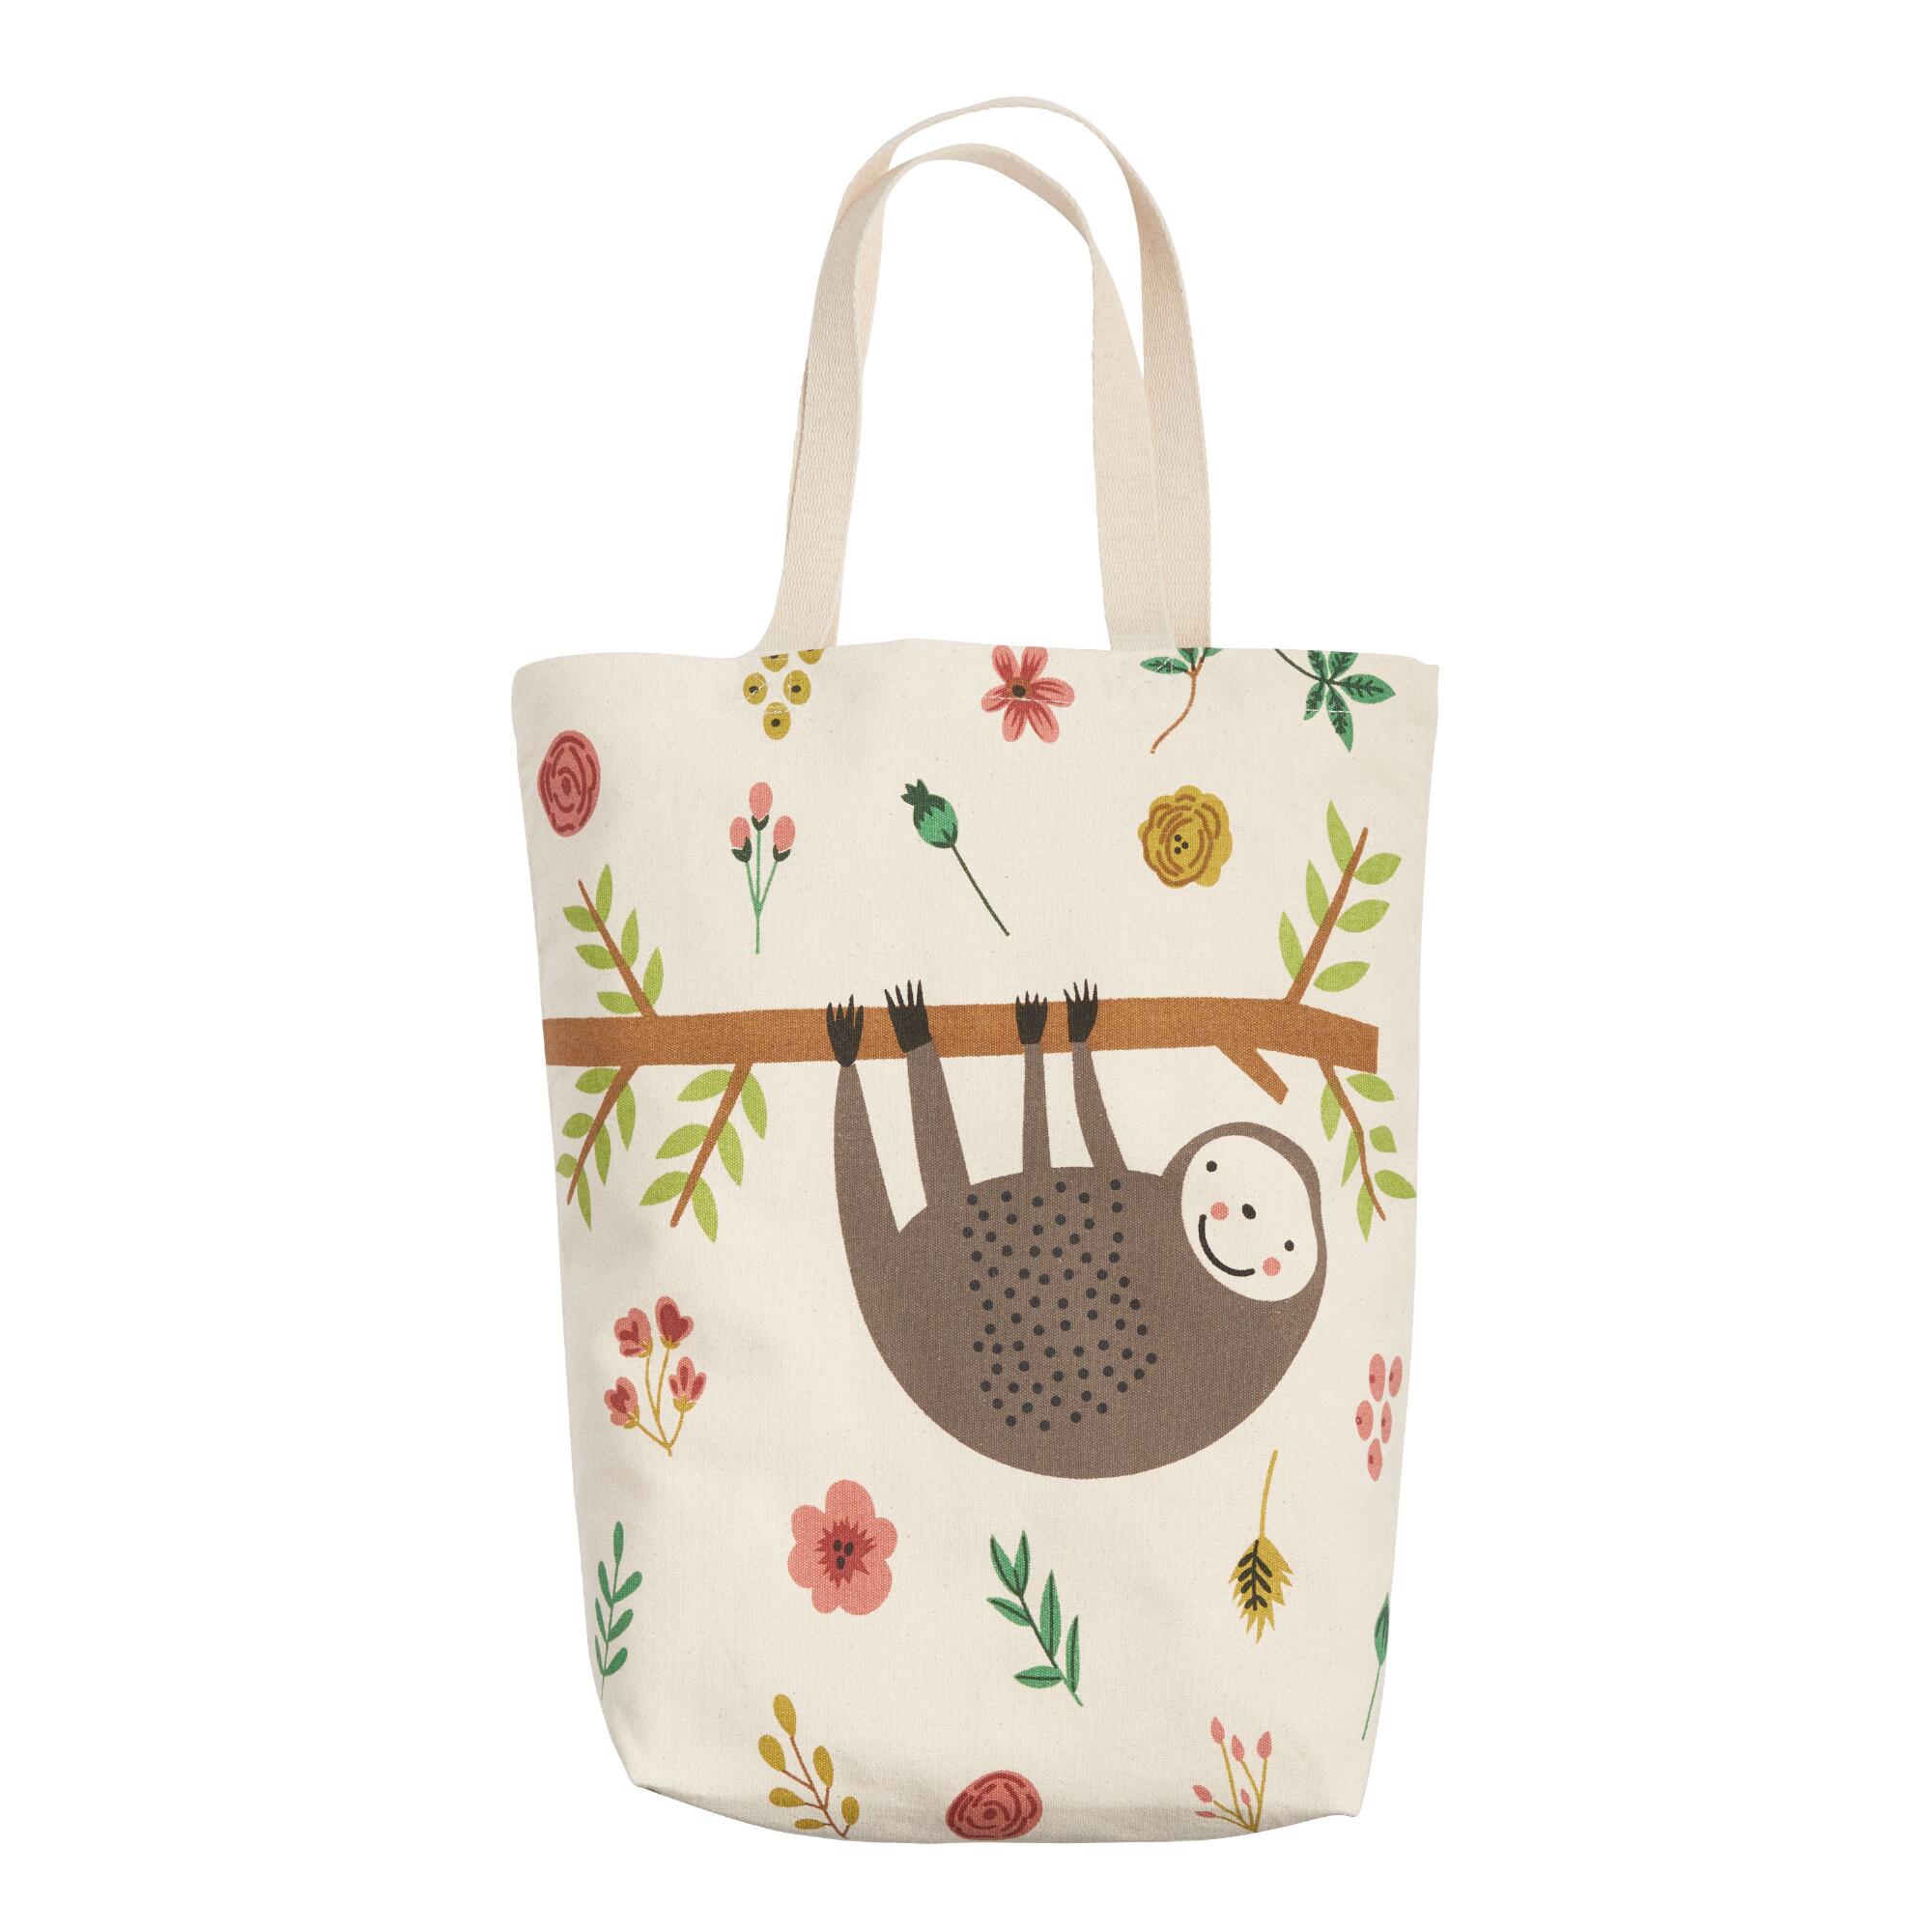 Sloth Floral Canvas Tote Bag by World Market